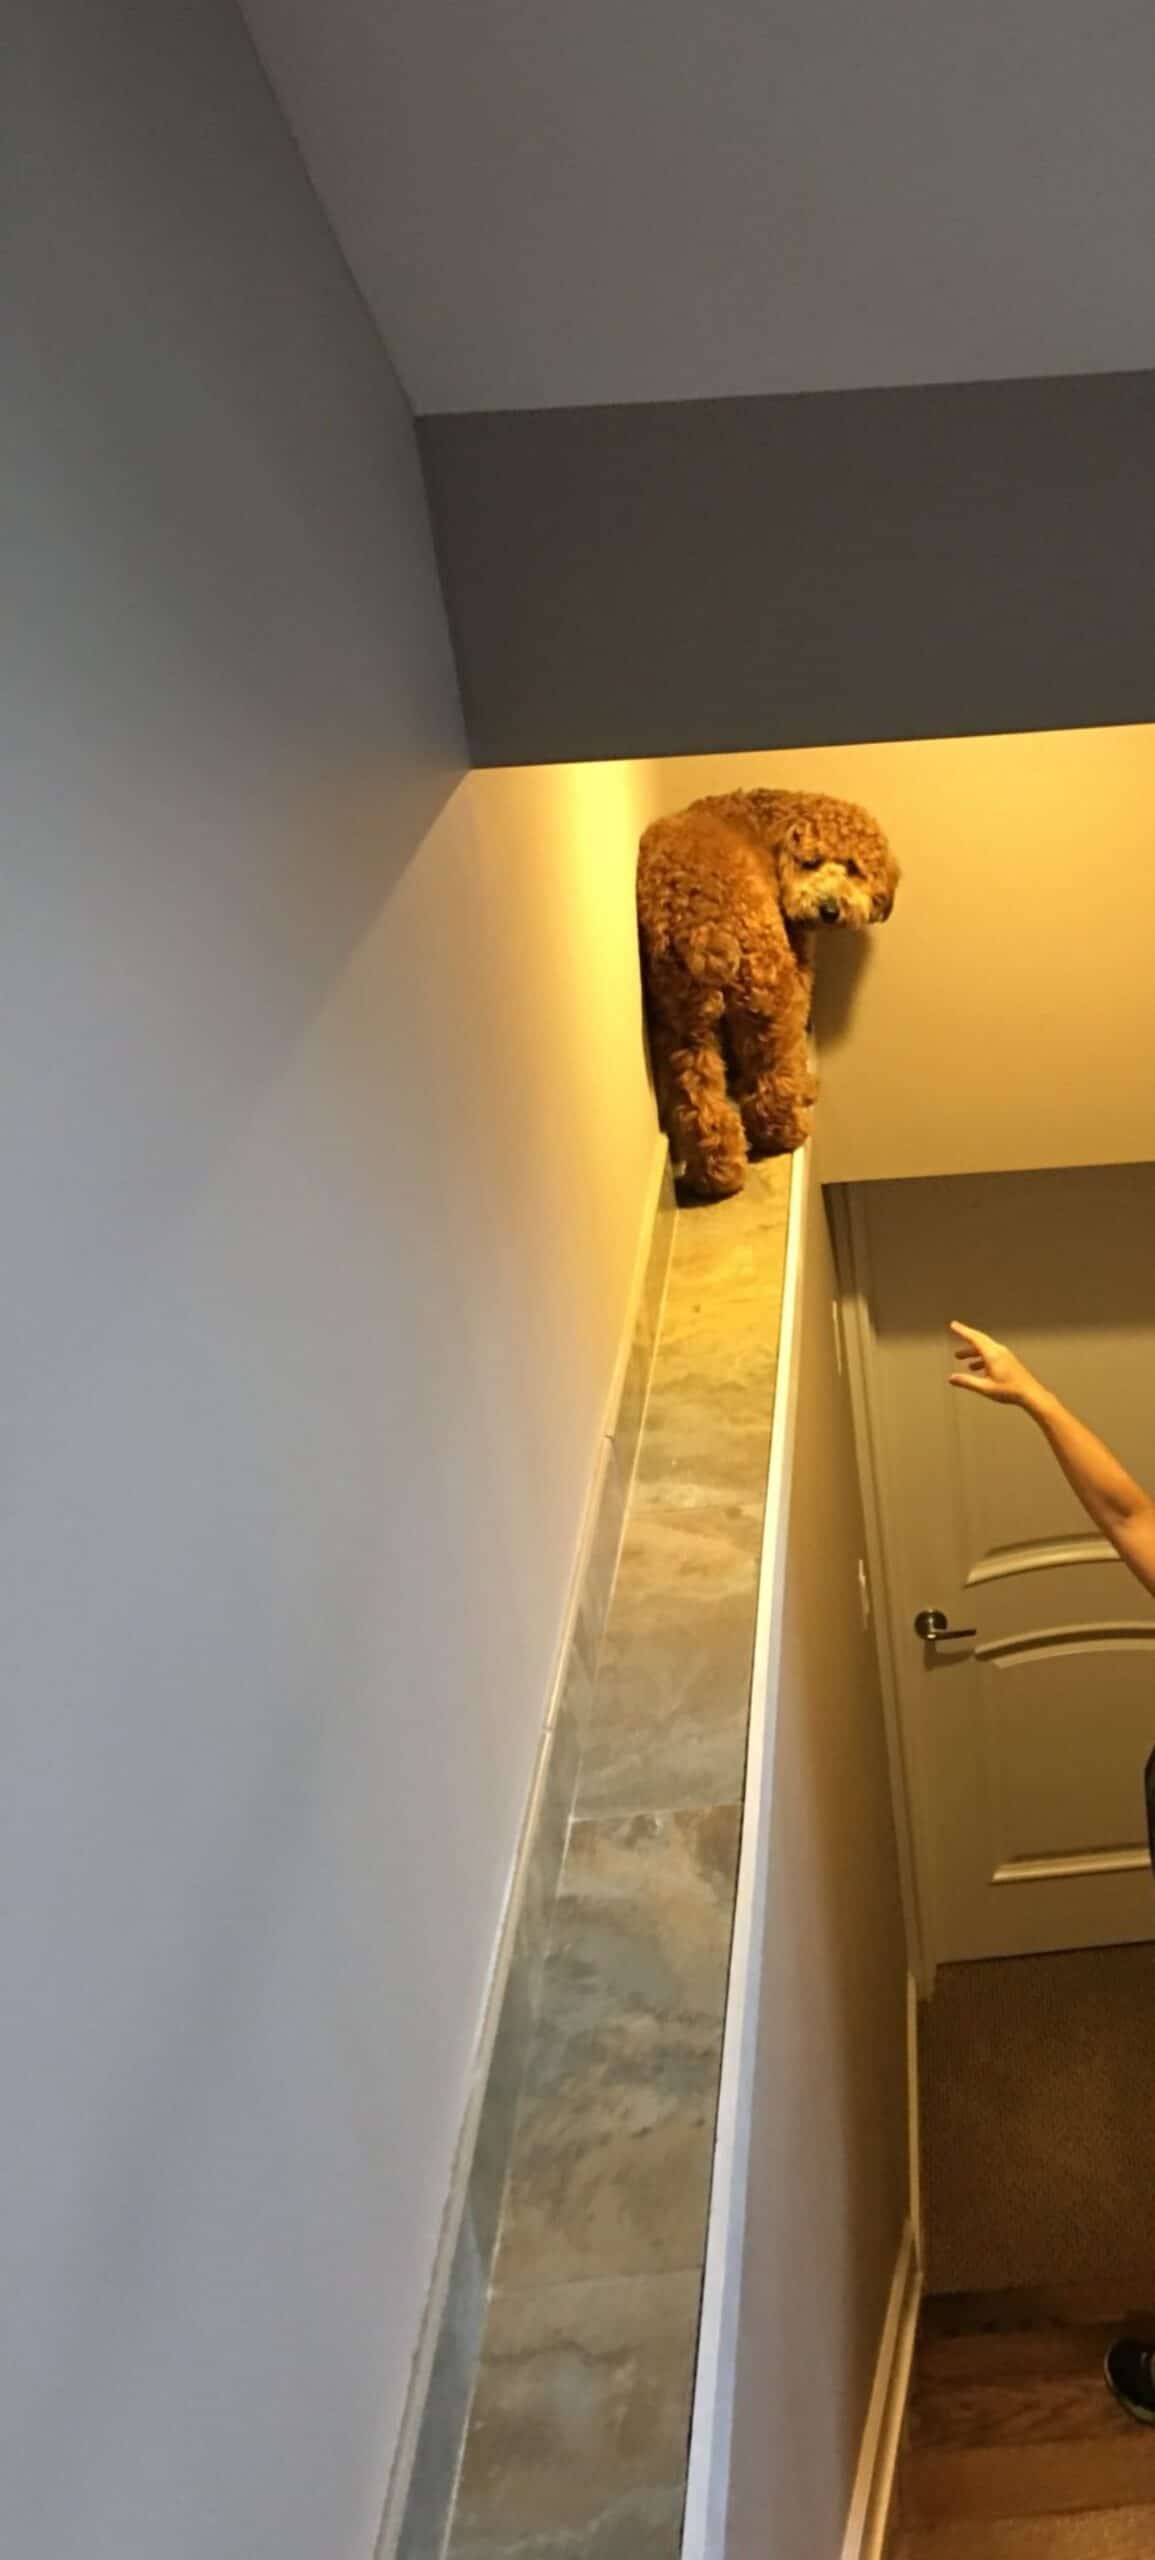 brown poodle on the corner of a ledge off of a stairwell with someone reaching up to the dog and the dog looking back at the camera